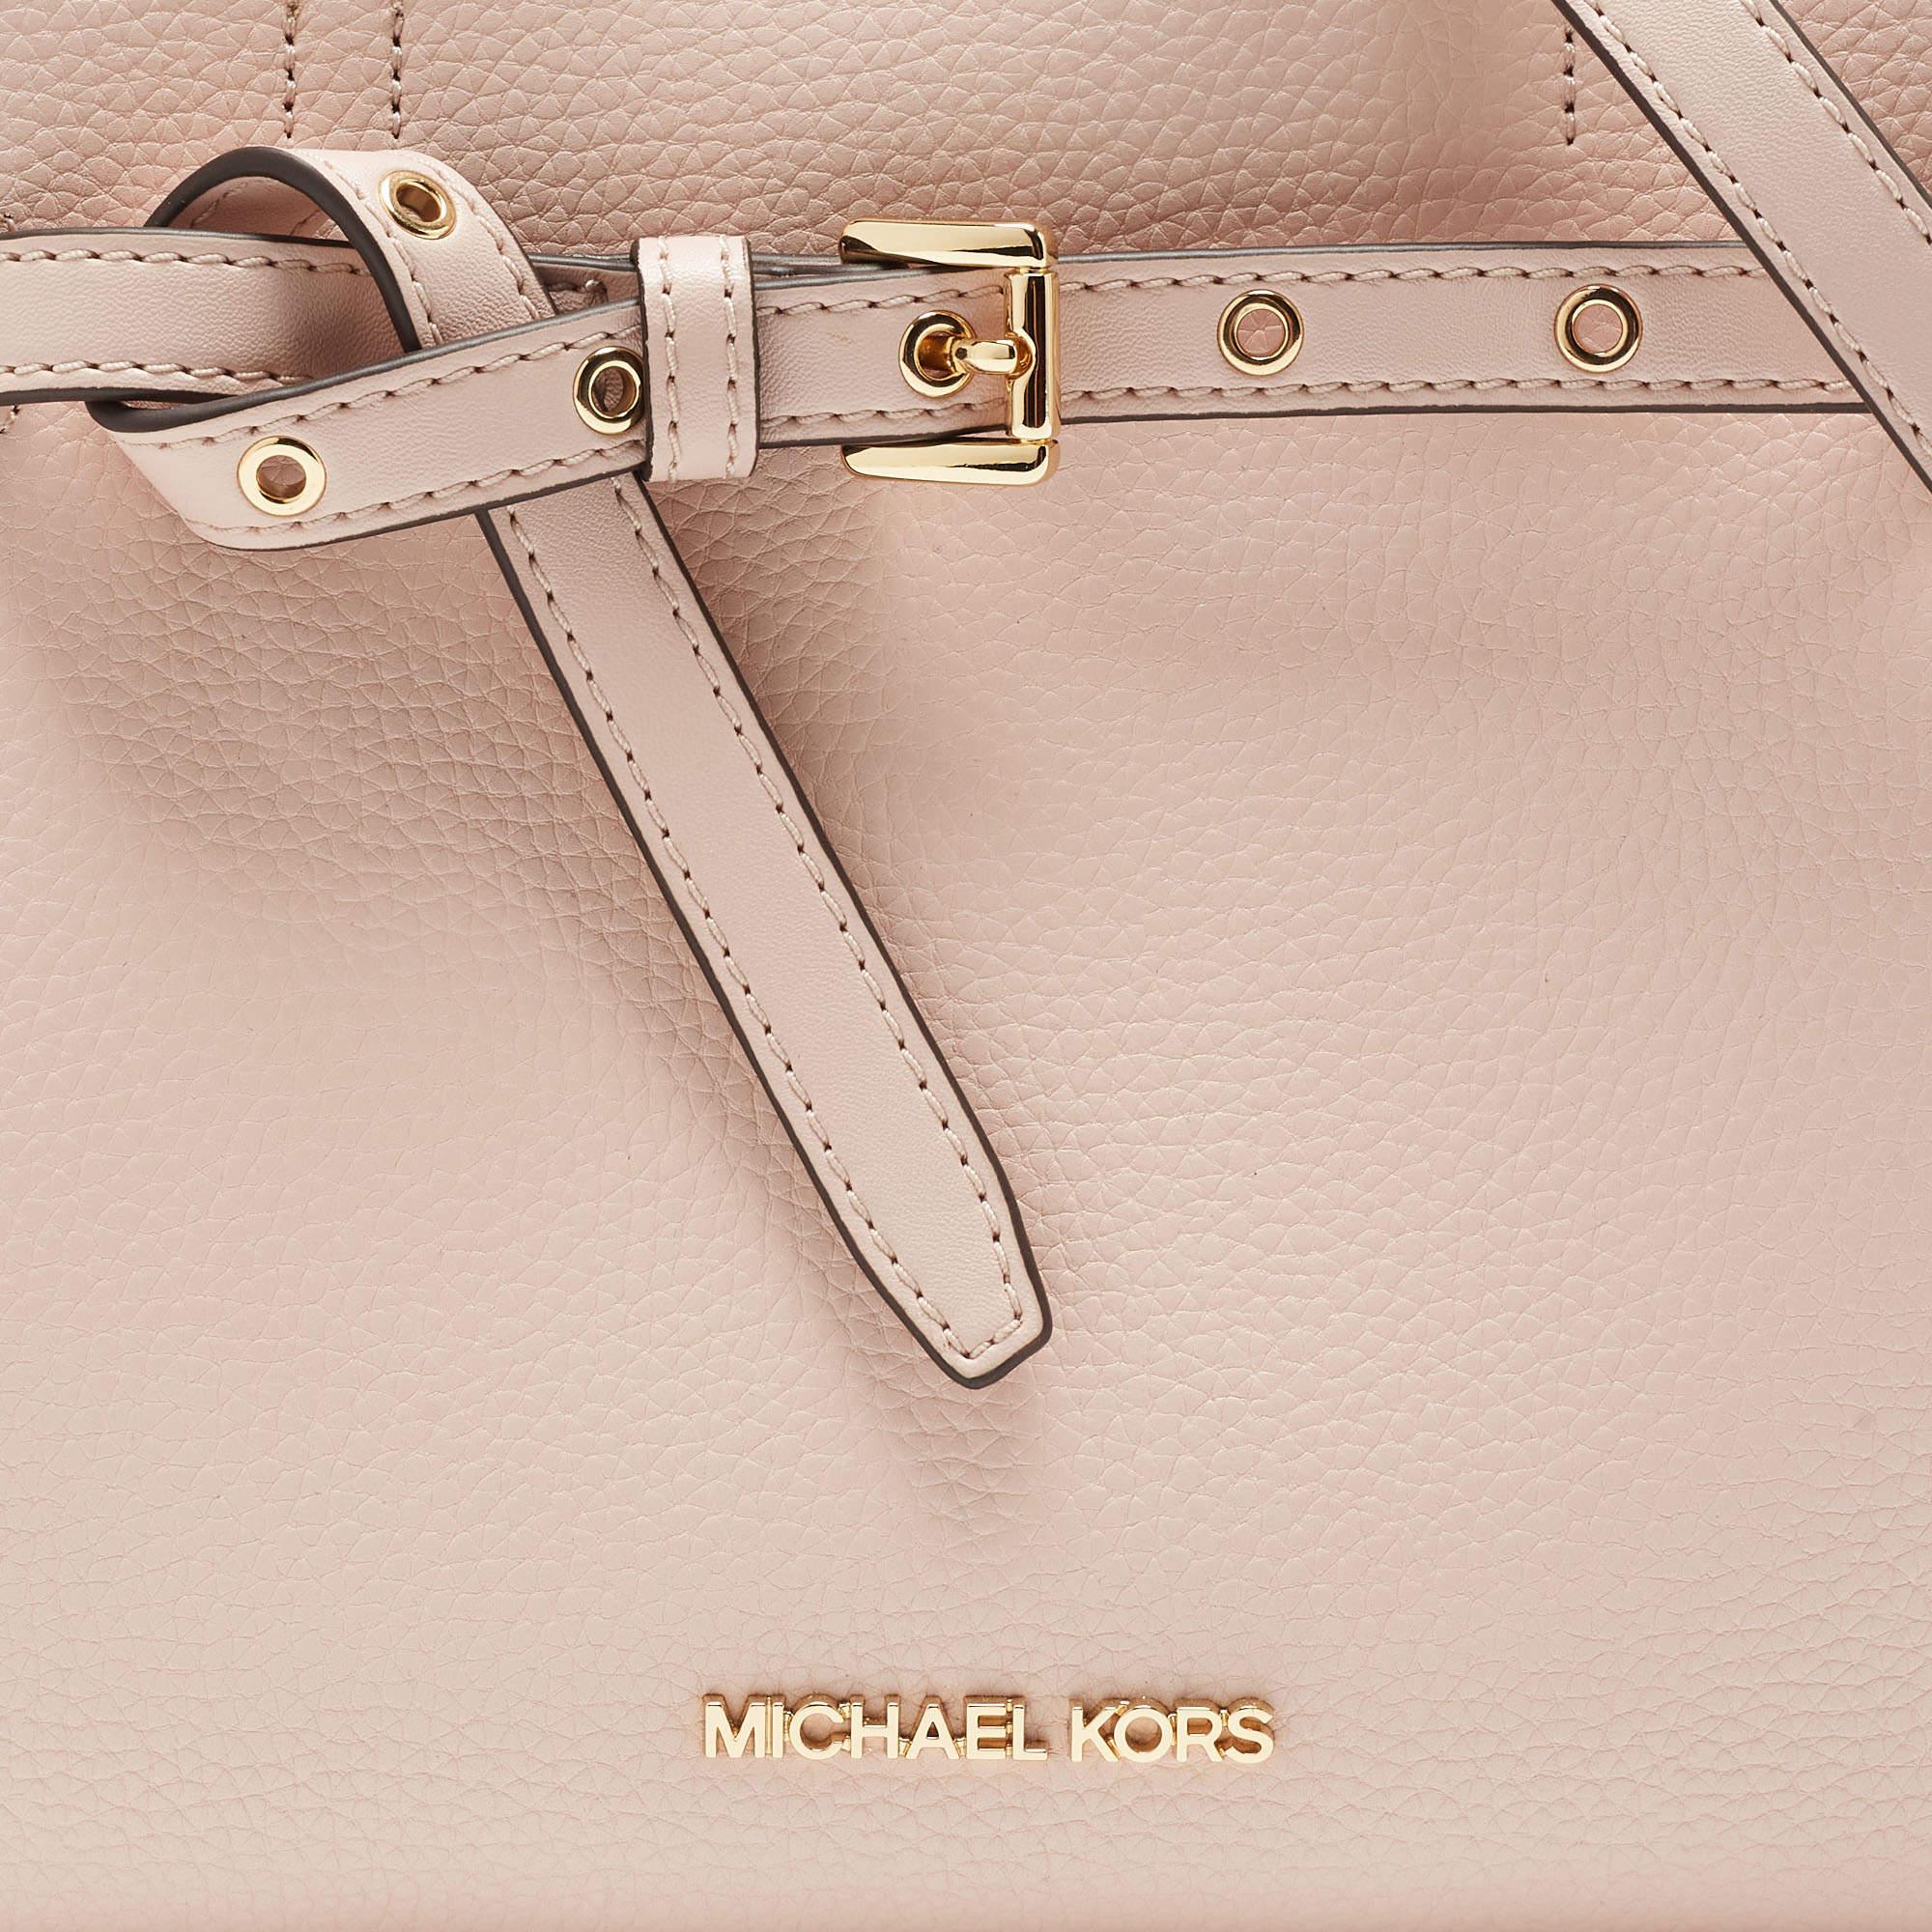 Michael Kors Pink Leather Small Emilia Tote 4